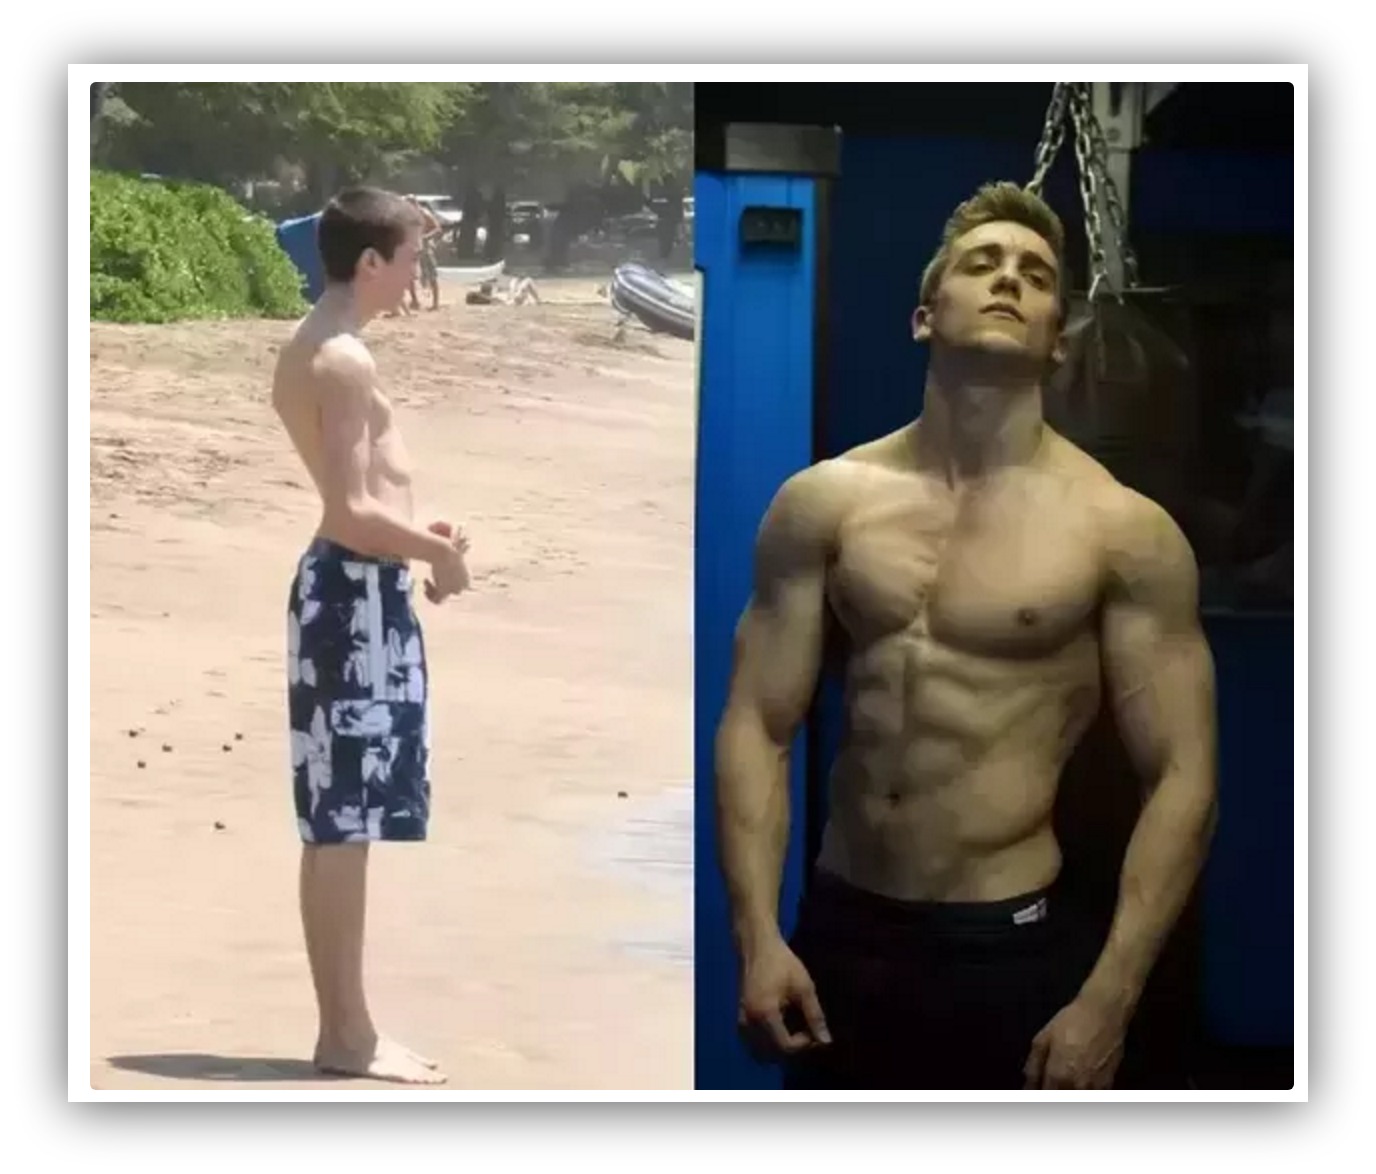 A before-after progress photo showing a man